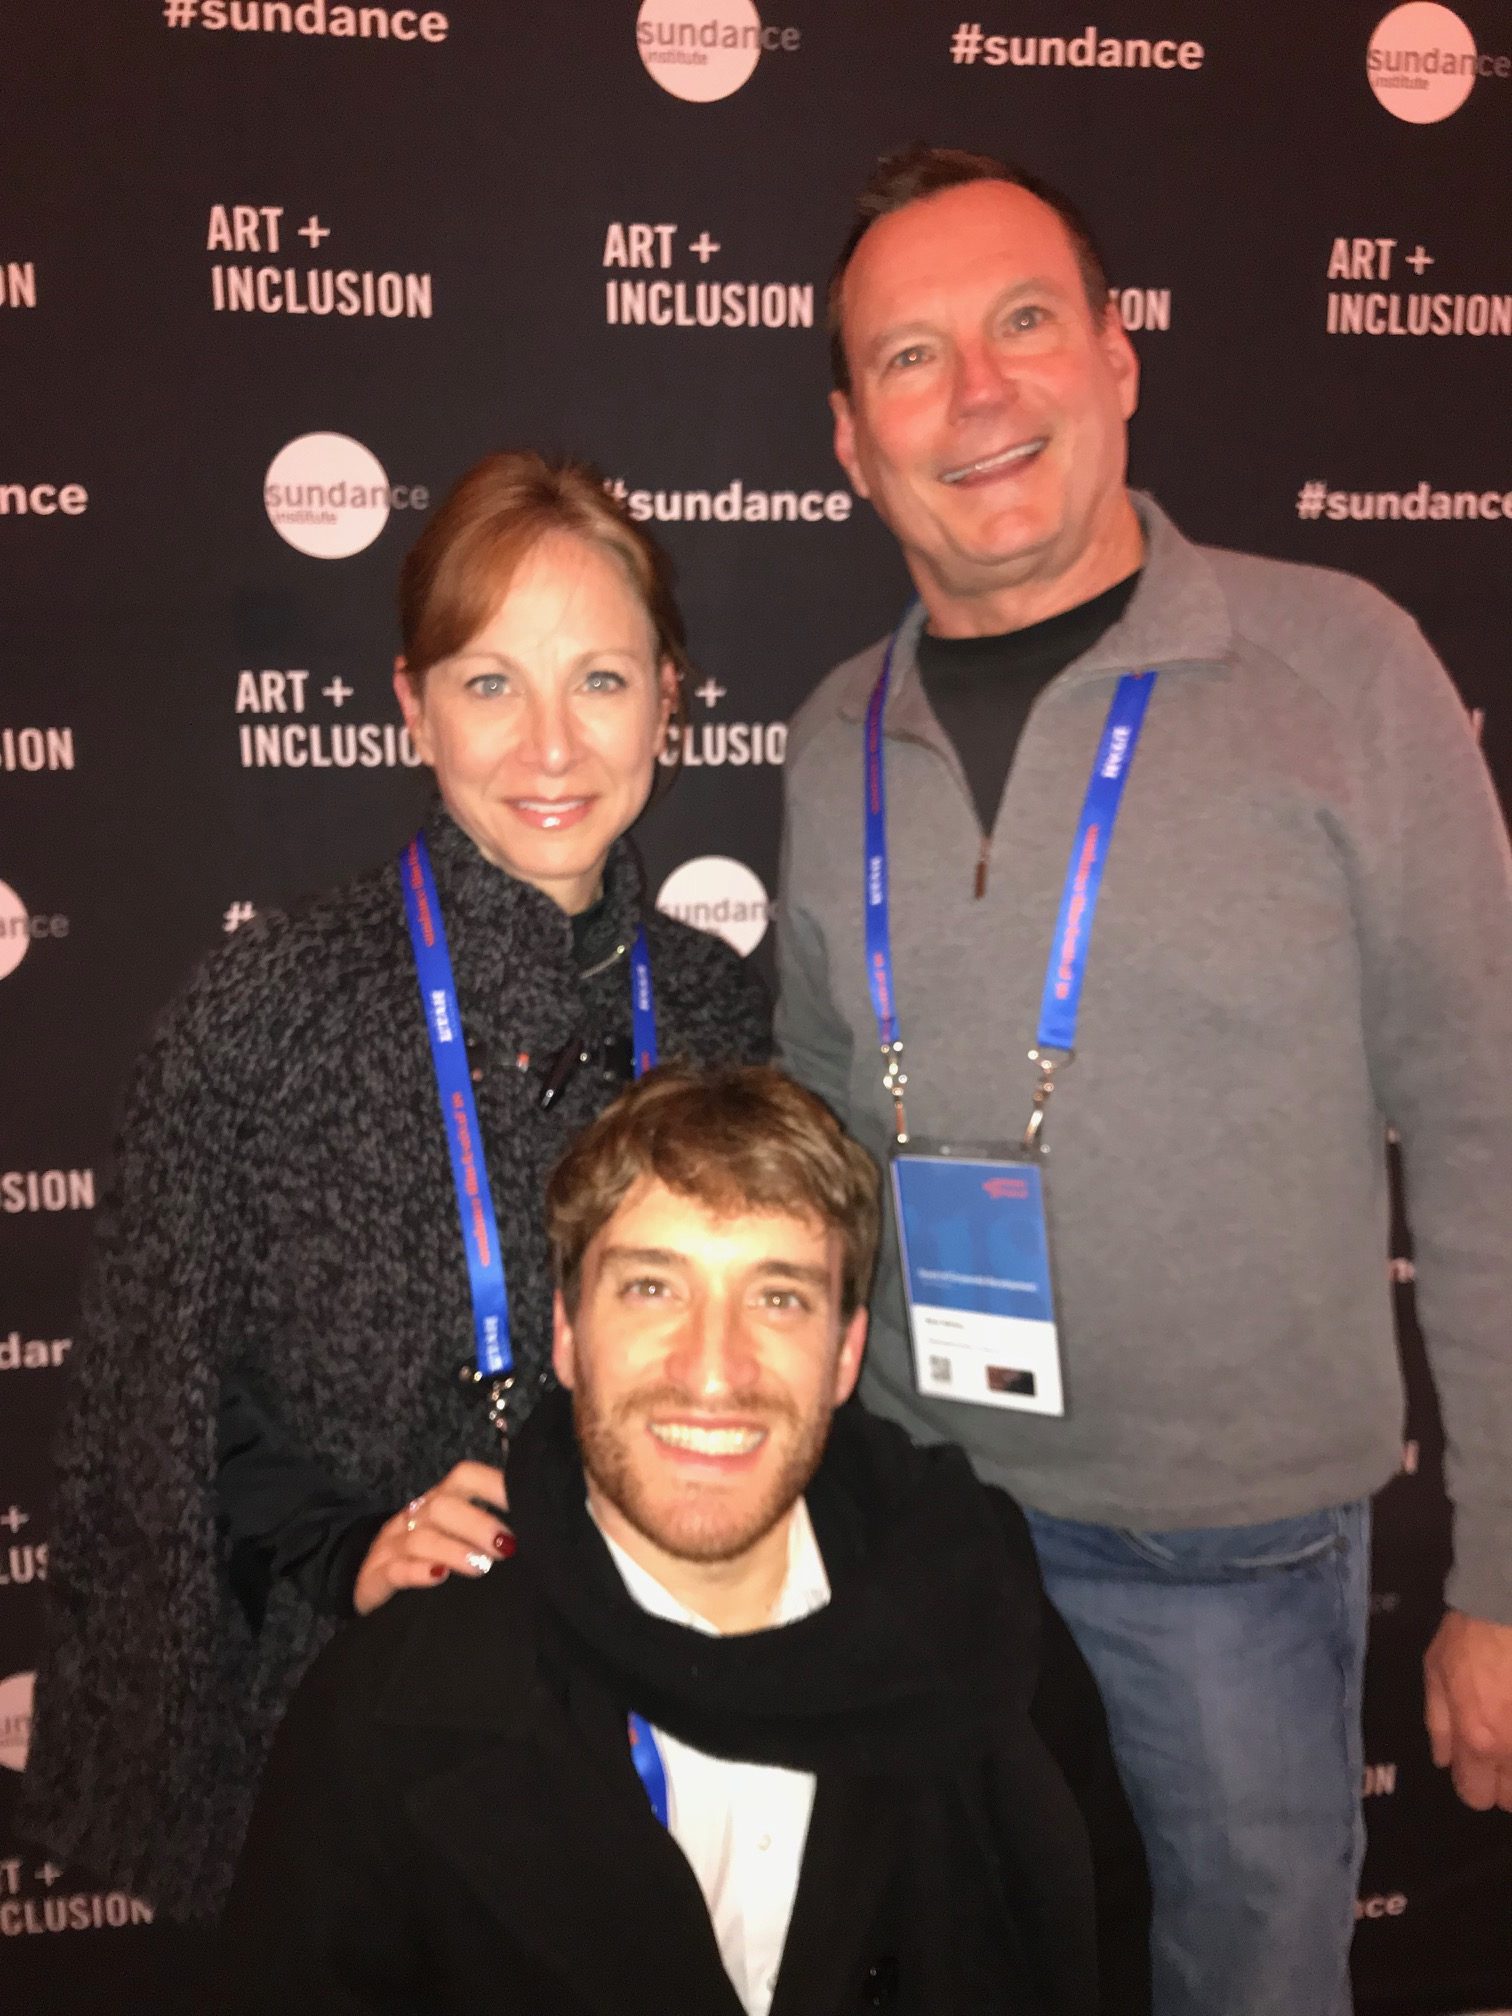 Nancy Weintraub, Mark Whitley and Nic Novicki attend the Sundance Film Festival to promote the Disability Film Challenge